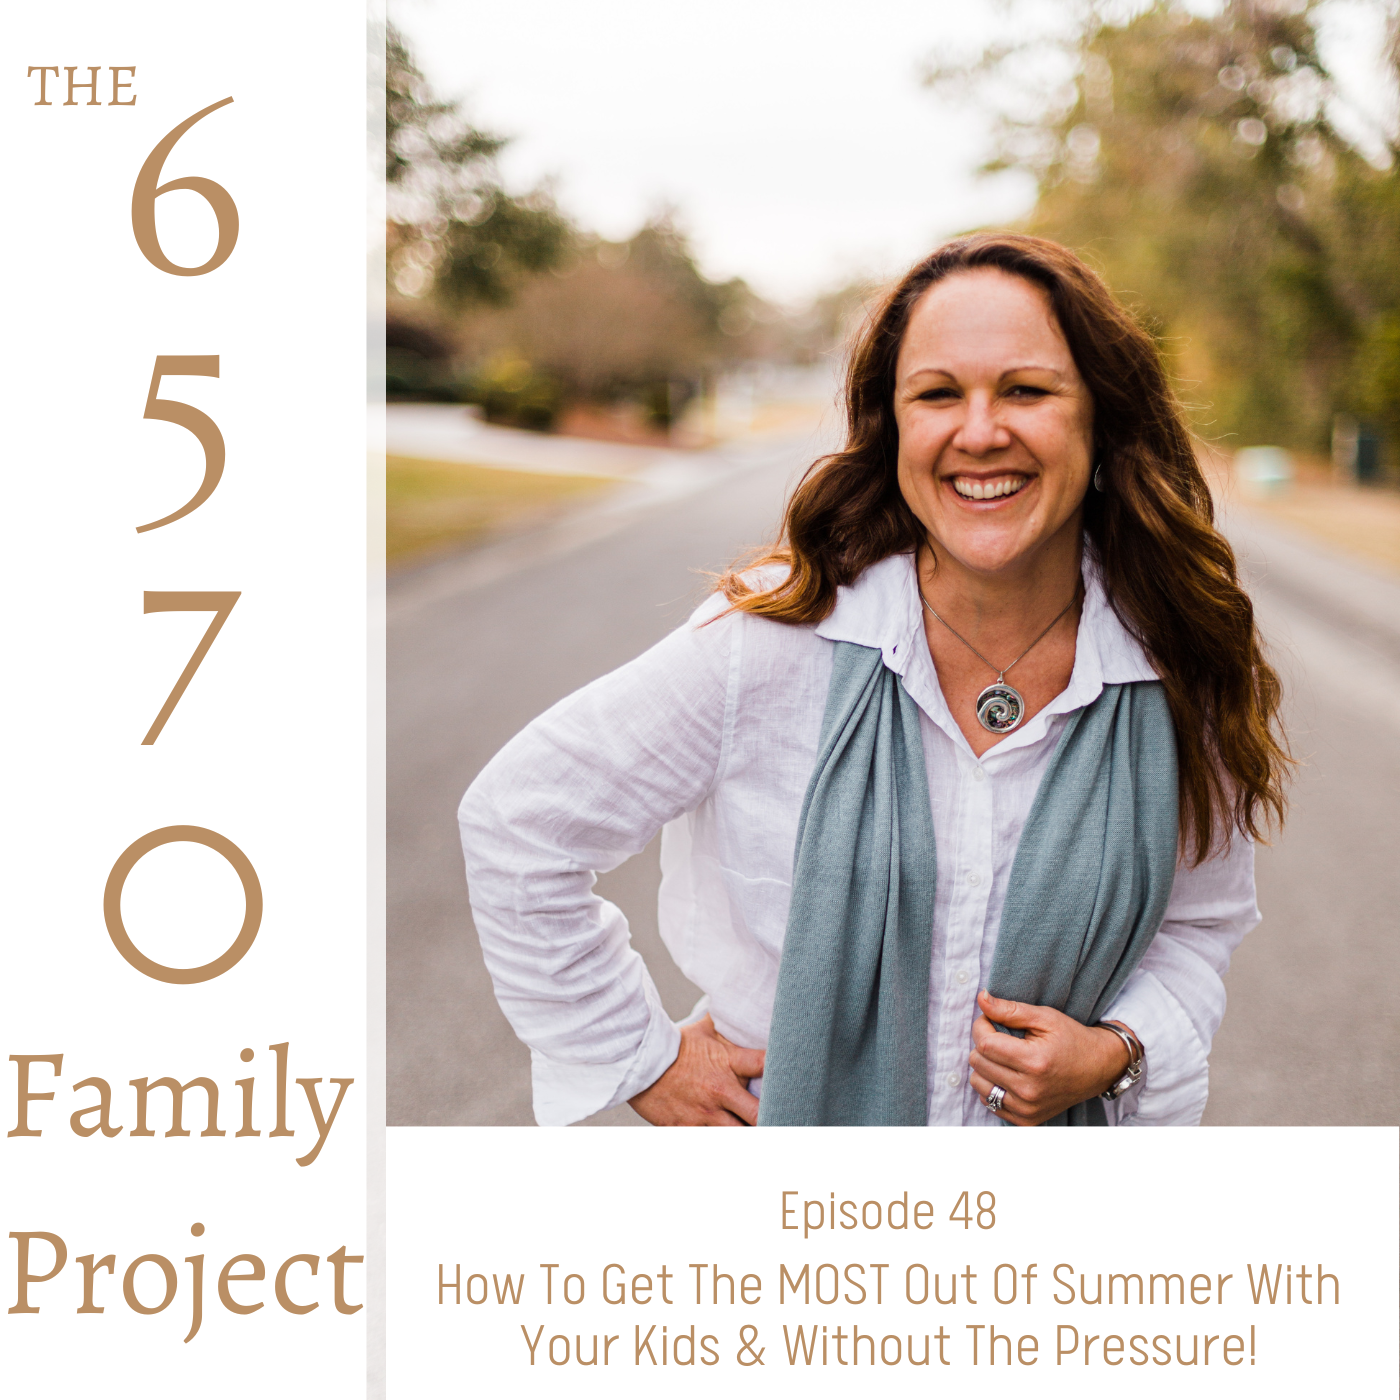 How To Get The MOST Out Of Summer With Your Kids & Without The Pressure!